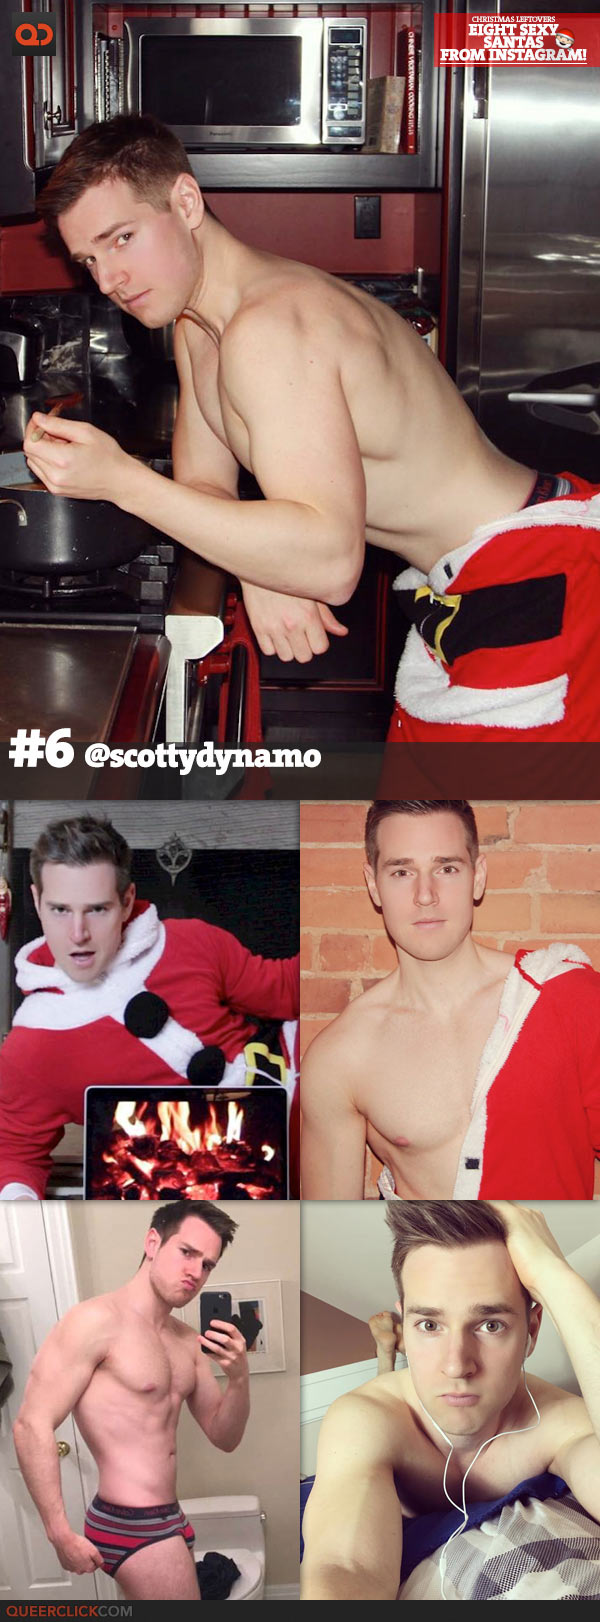 Christmas Leftovers: Eight Sexy Santas From Instagram!